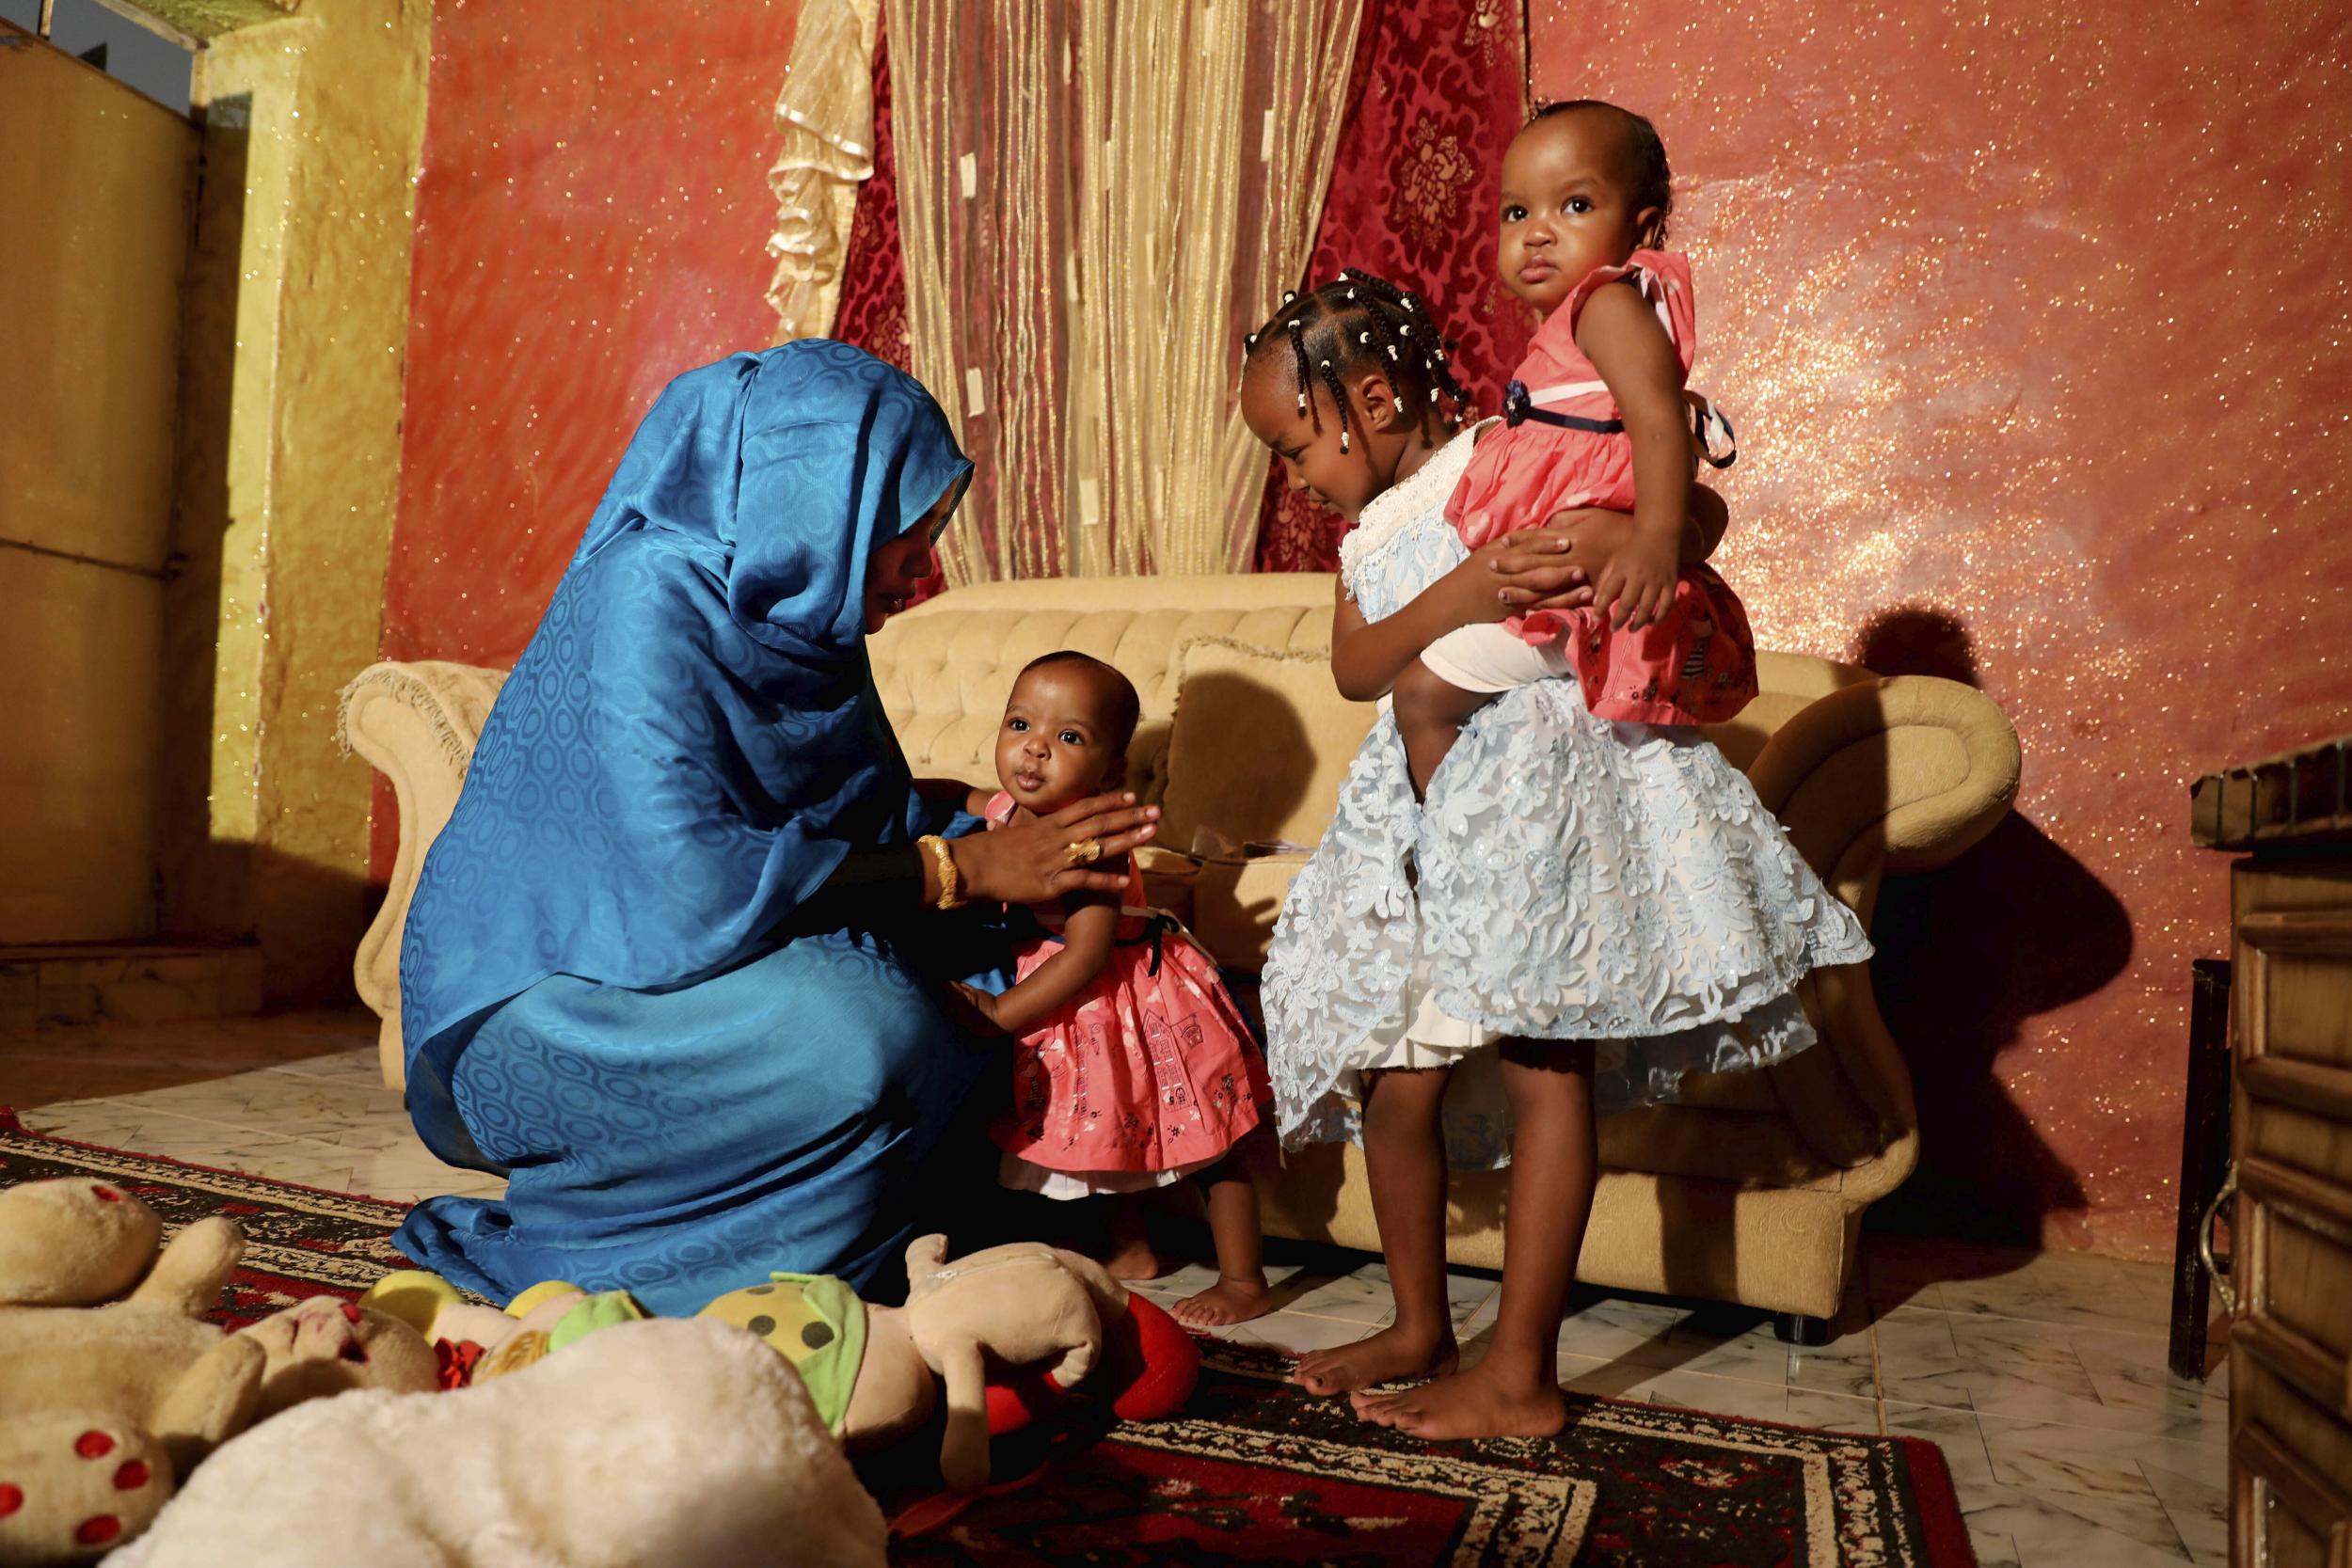 Youssria Awad plays with her daughters in their home, in Khartoum, Sudan. She refuses to carry out female genital mutilation on them, a practice that involves partial or total removal of the external female genitalia for non-medical reasons